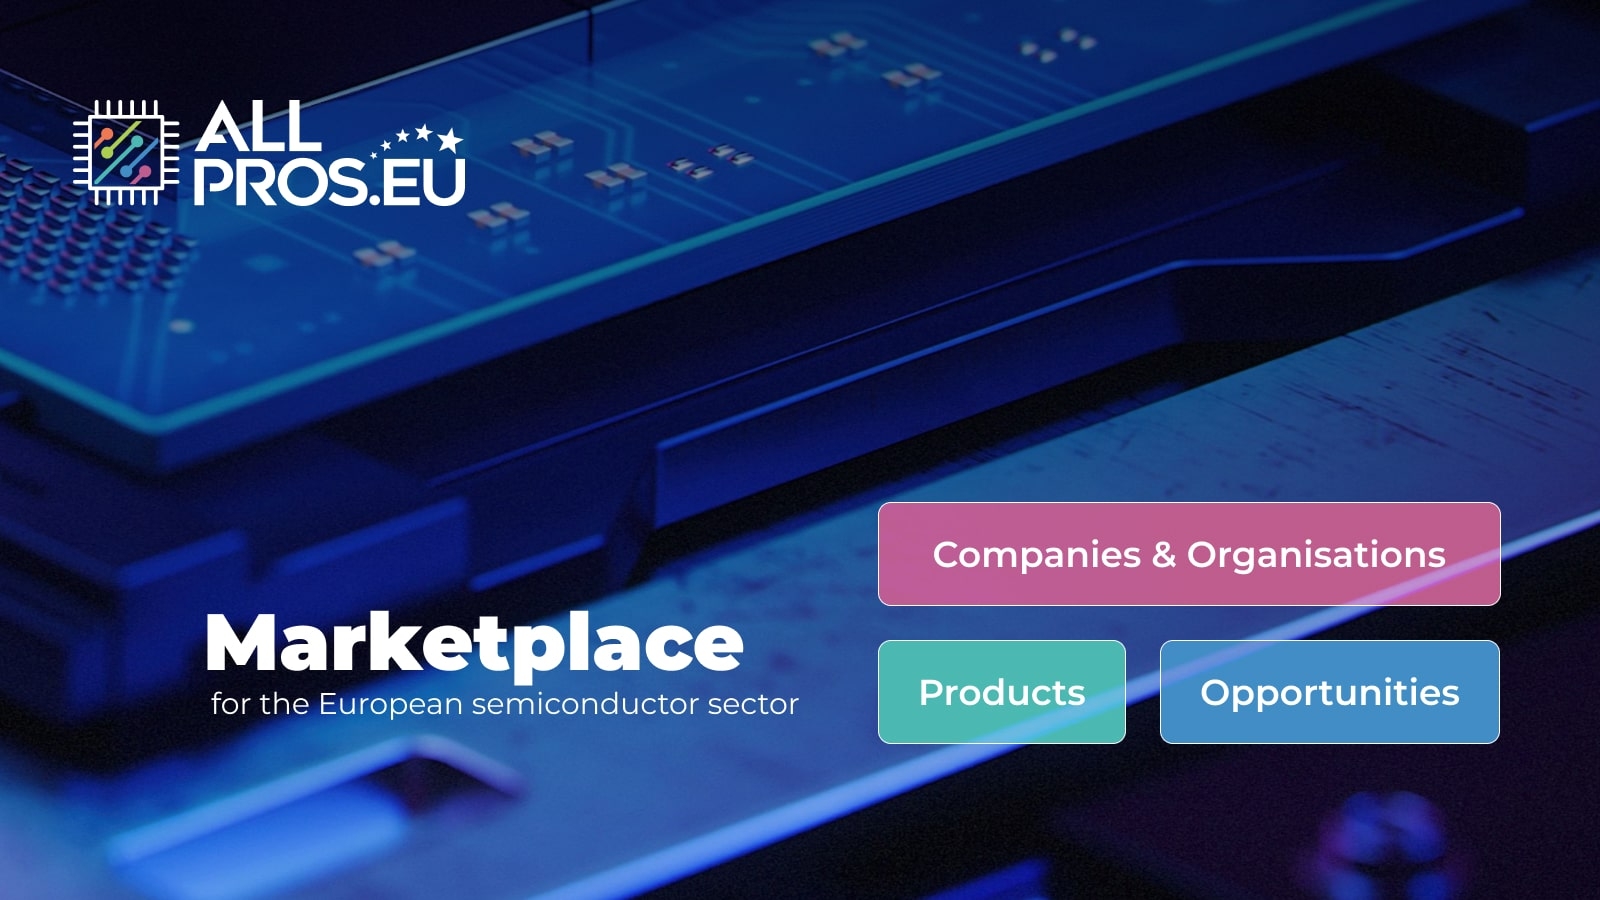 ALLPROS.eu has delivered a Suite of Tools including a Marketplace of Synergies